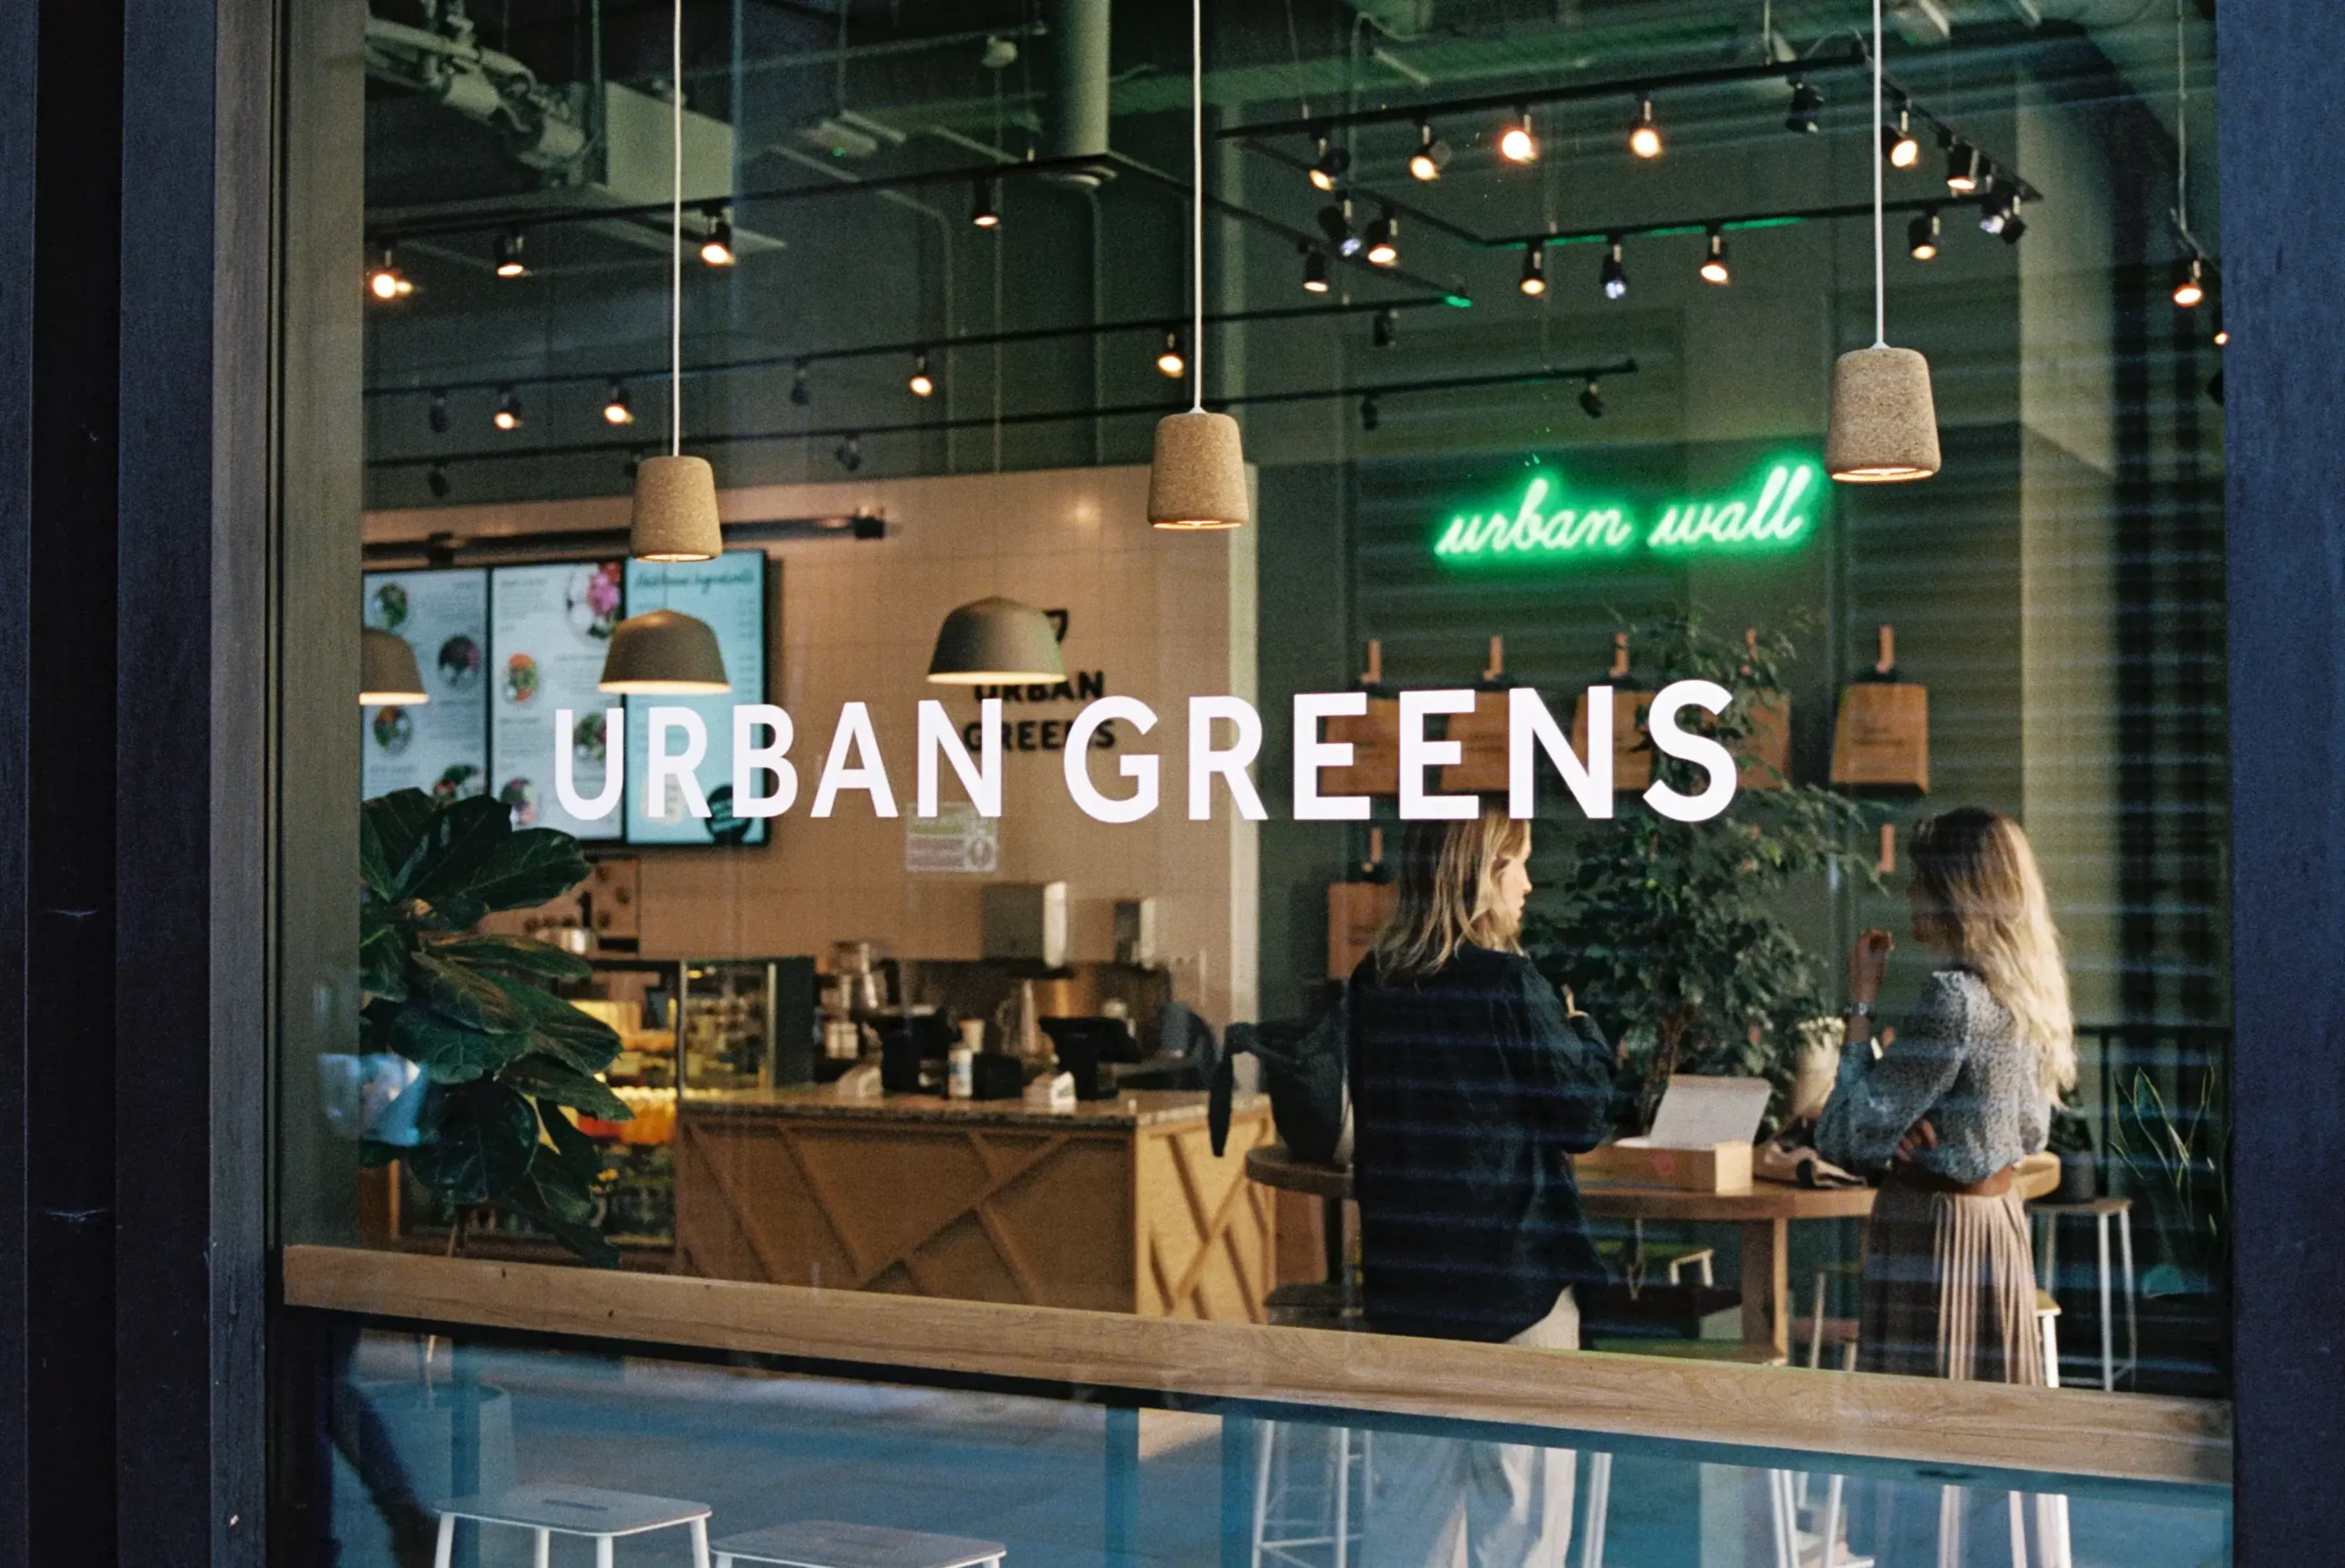 URBAN GREENS: FROM FRAGMENTED TOOLS TO NORY’S UNIFIED OPERATING SYSTEM